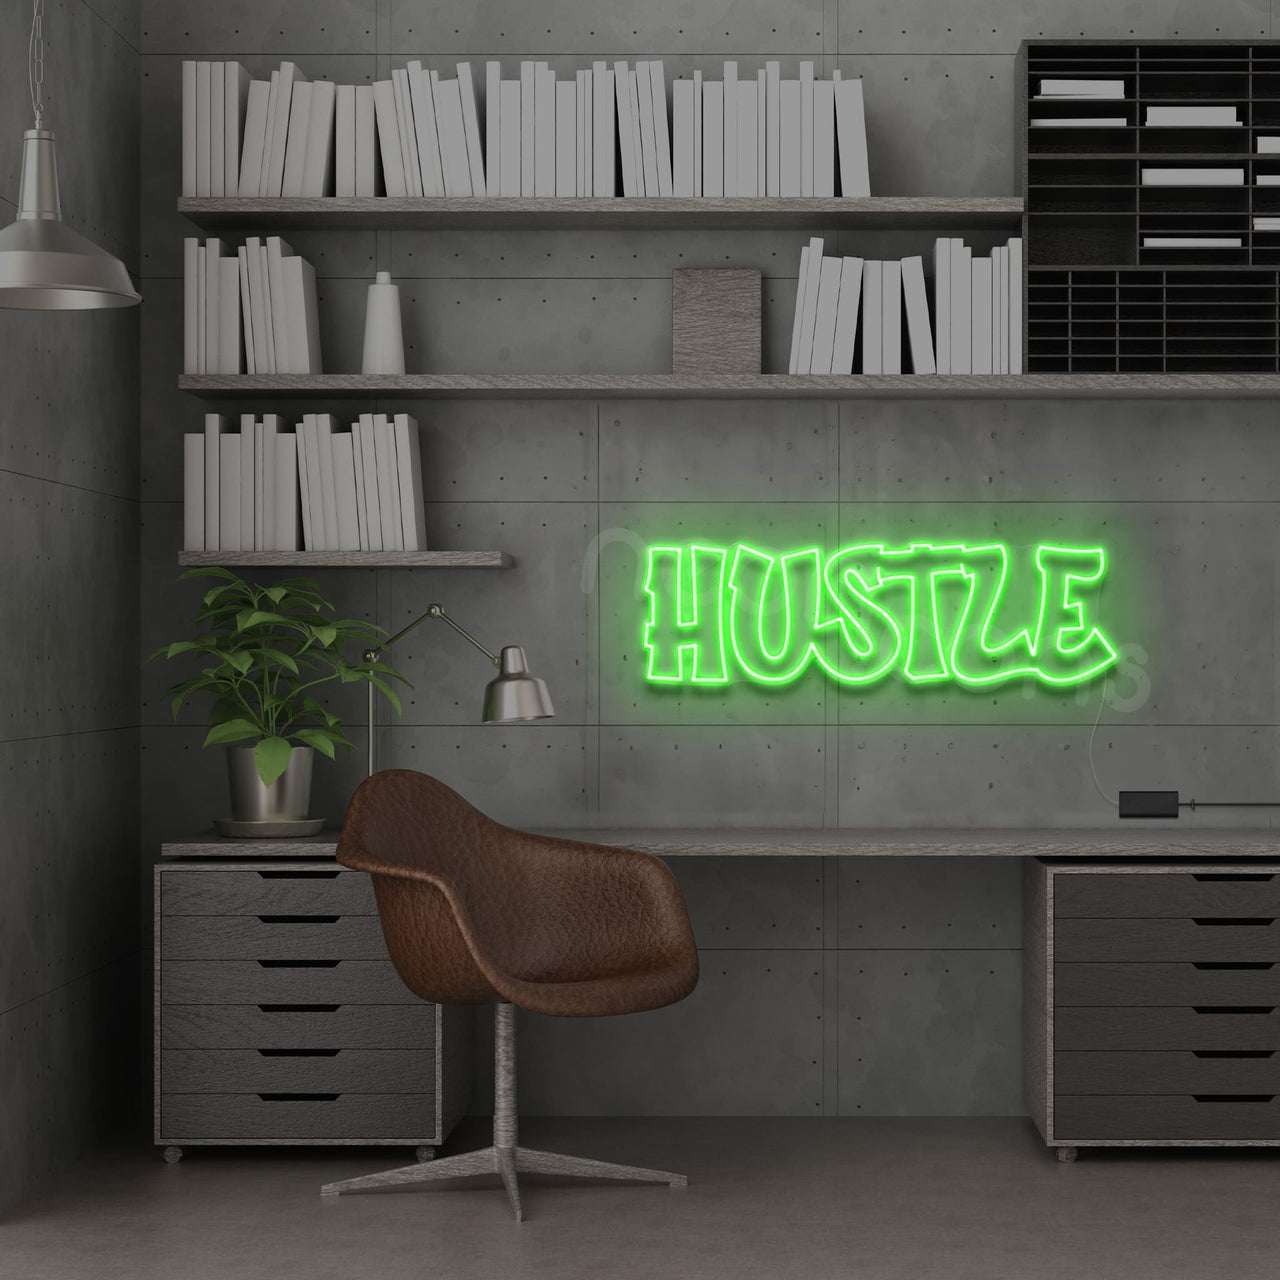 "Hustle" Neon Sign 60cm (2ft) / Green / LED by Neon Icons